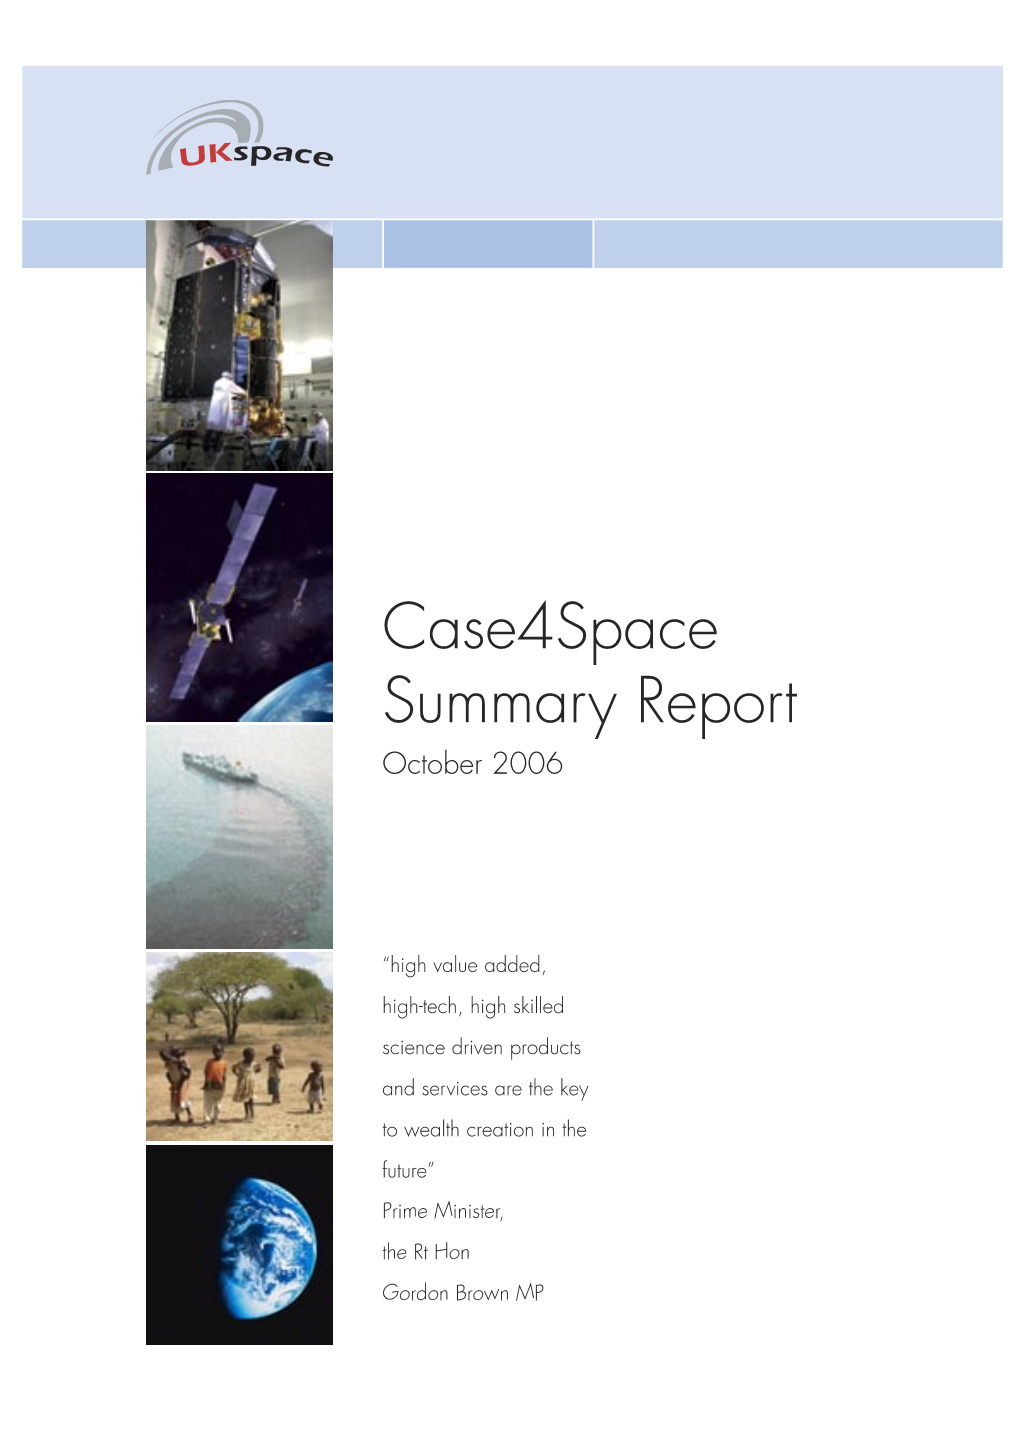 The Case for Space Summary Report